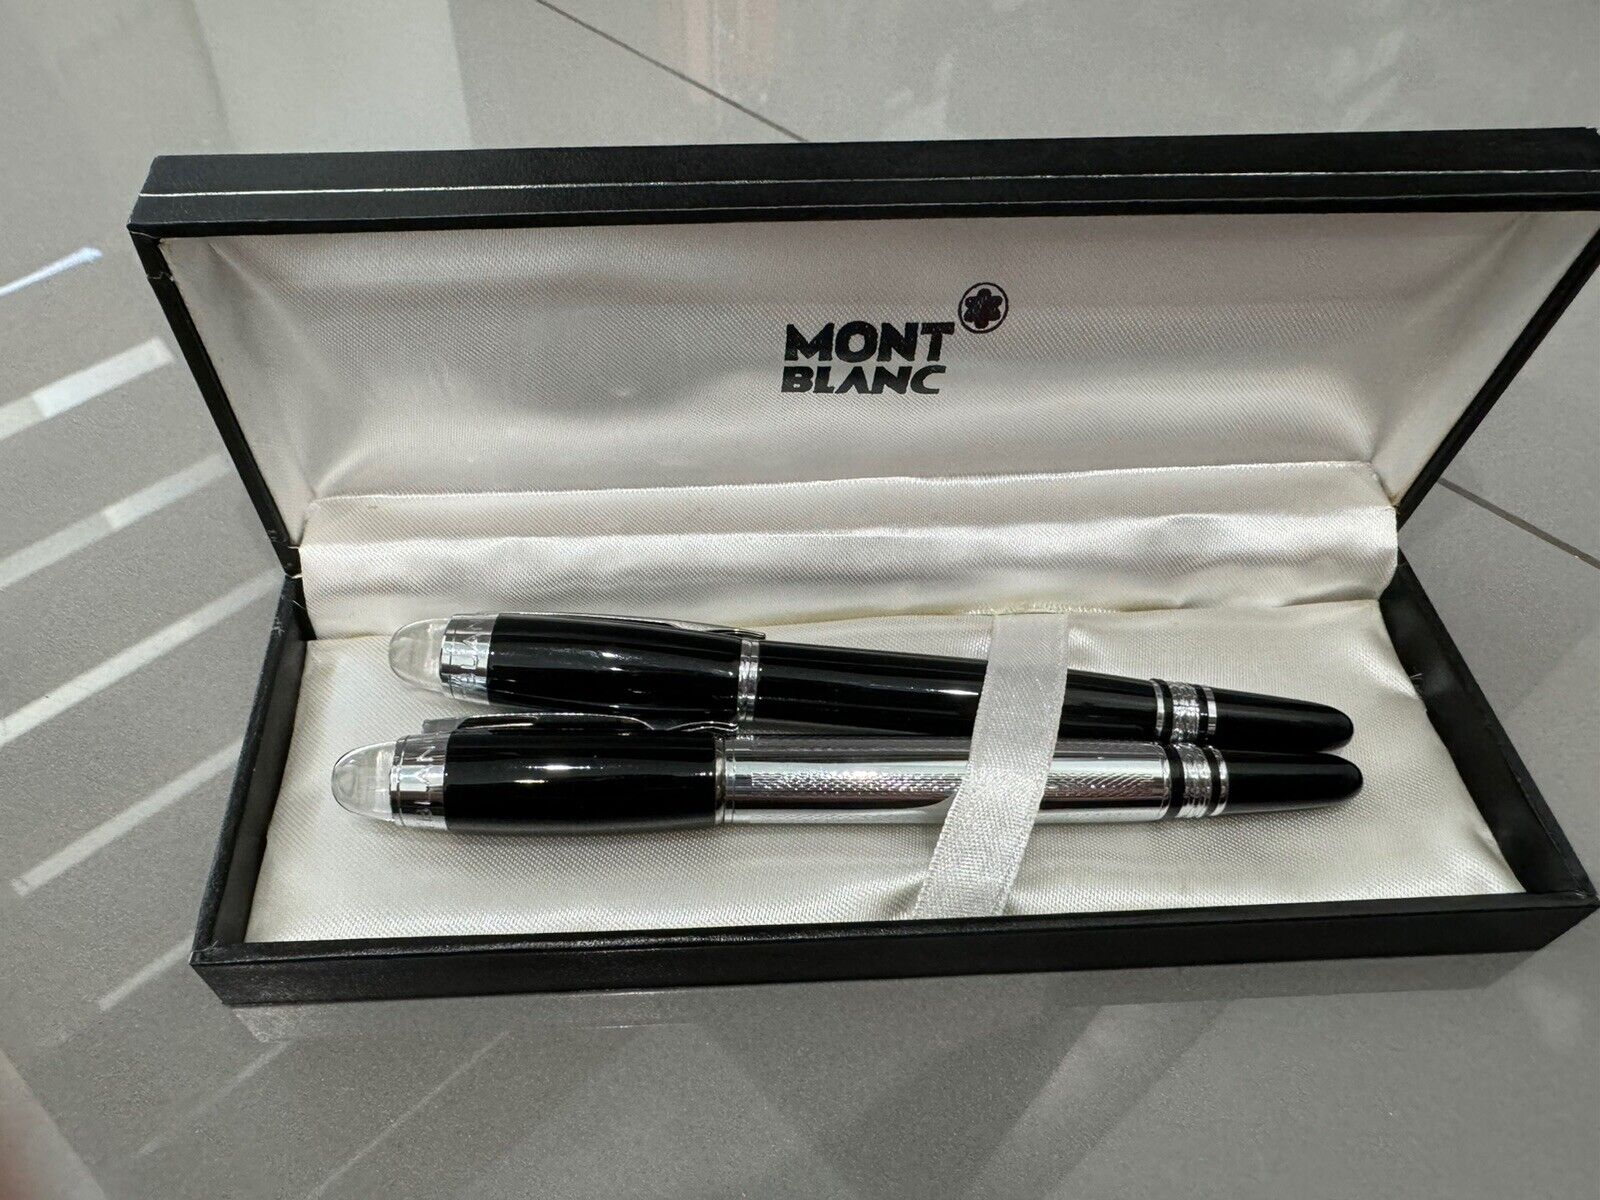 Gorgeous Lot Of 2 Montblanc Ballpoint Pens In Box